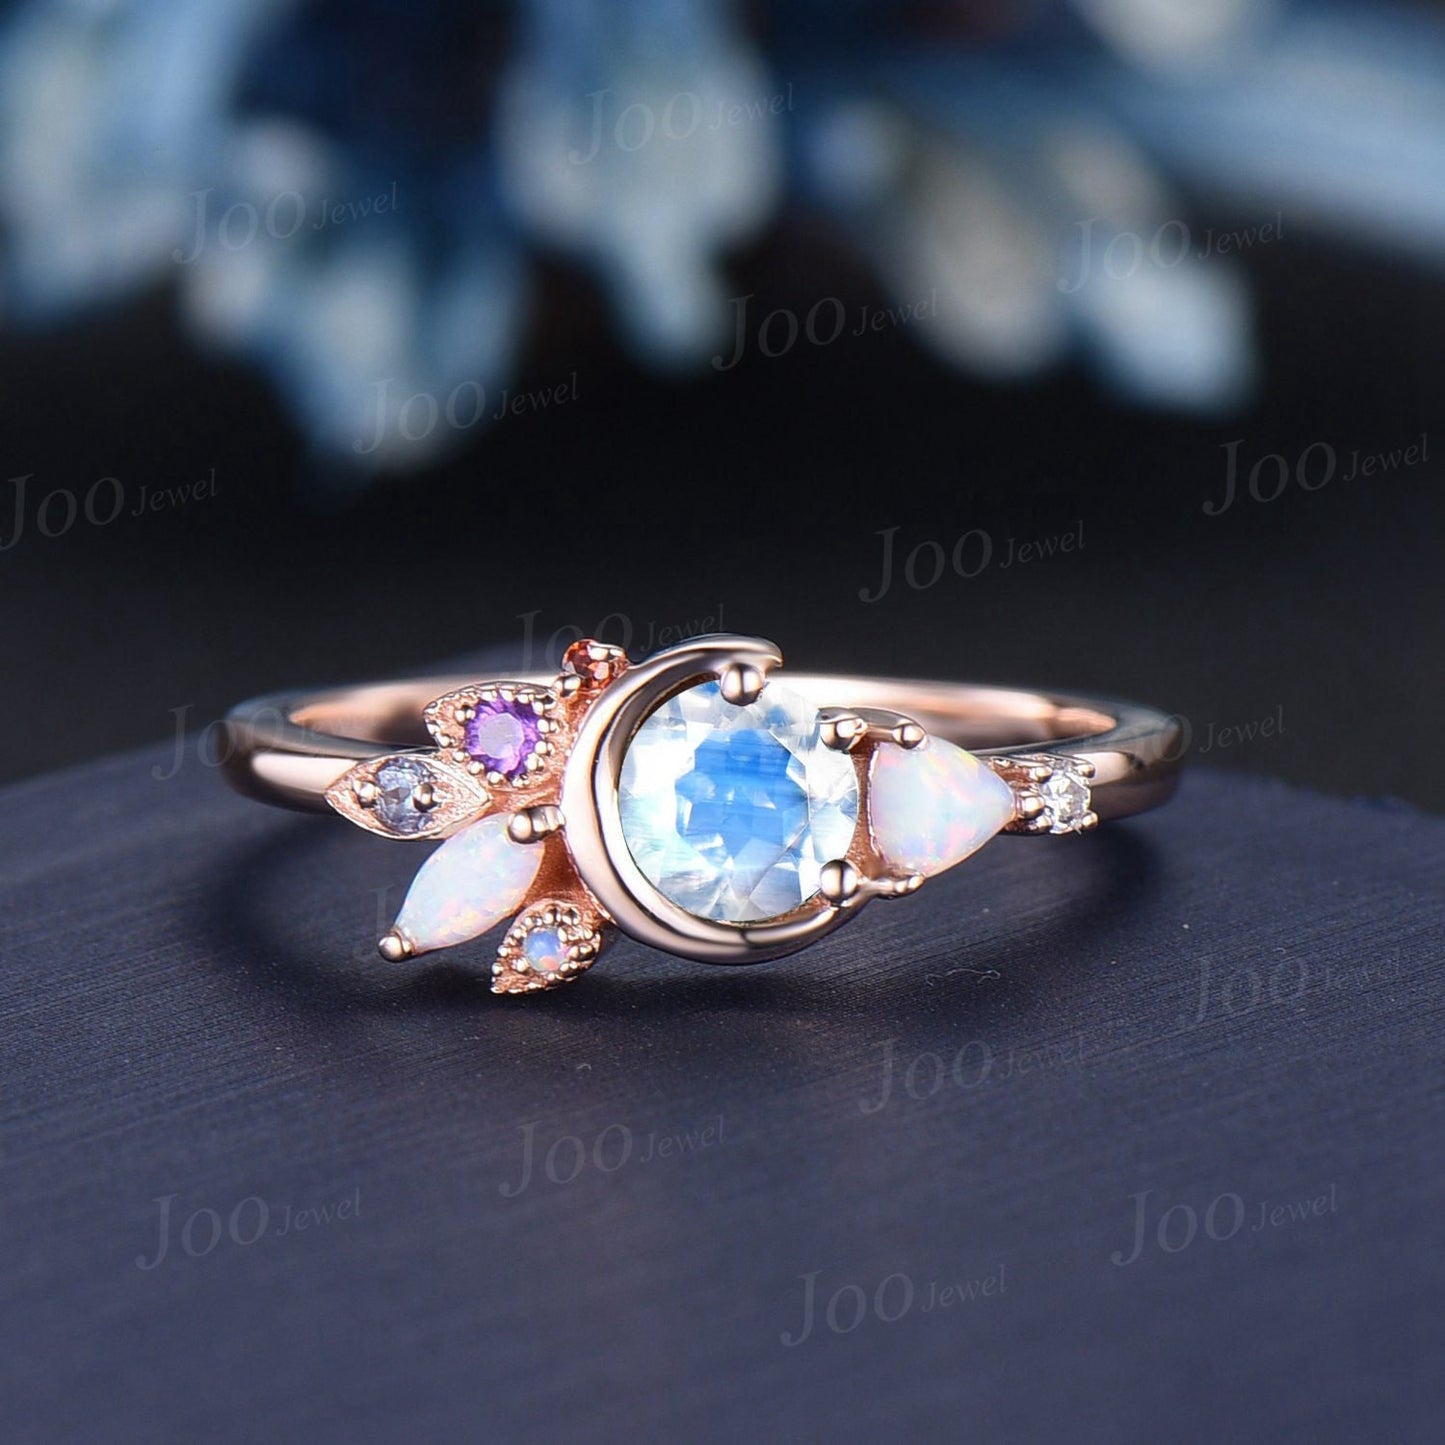 Unique 5mm Round Natural Rainbow Moonstone Opal Cluster Celestial Moon Wedding Ring Personalized Handcrafted June Birthstone Gifts for Mom